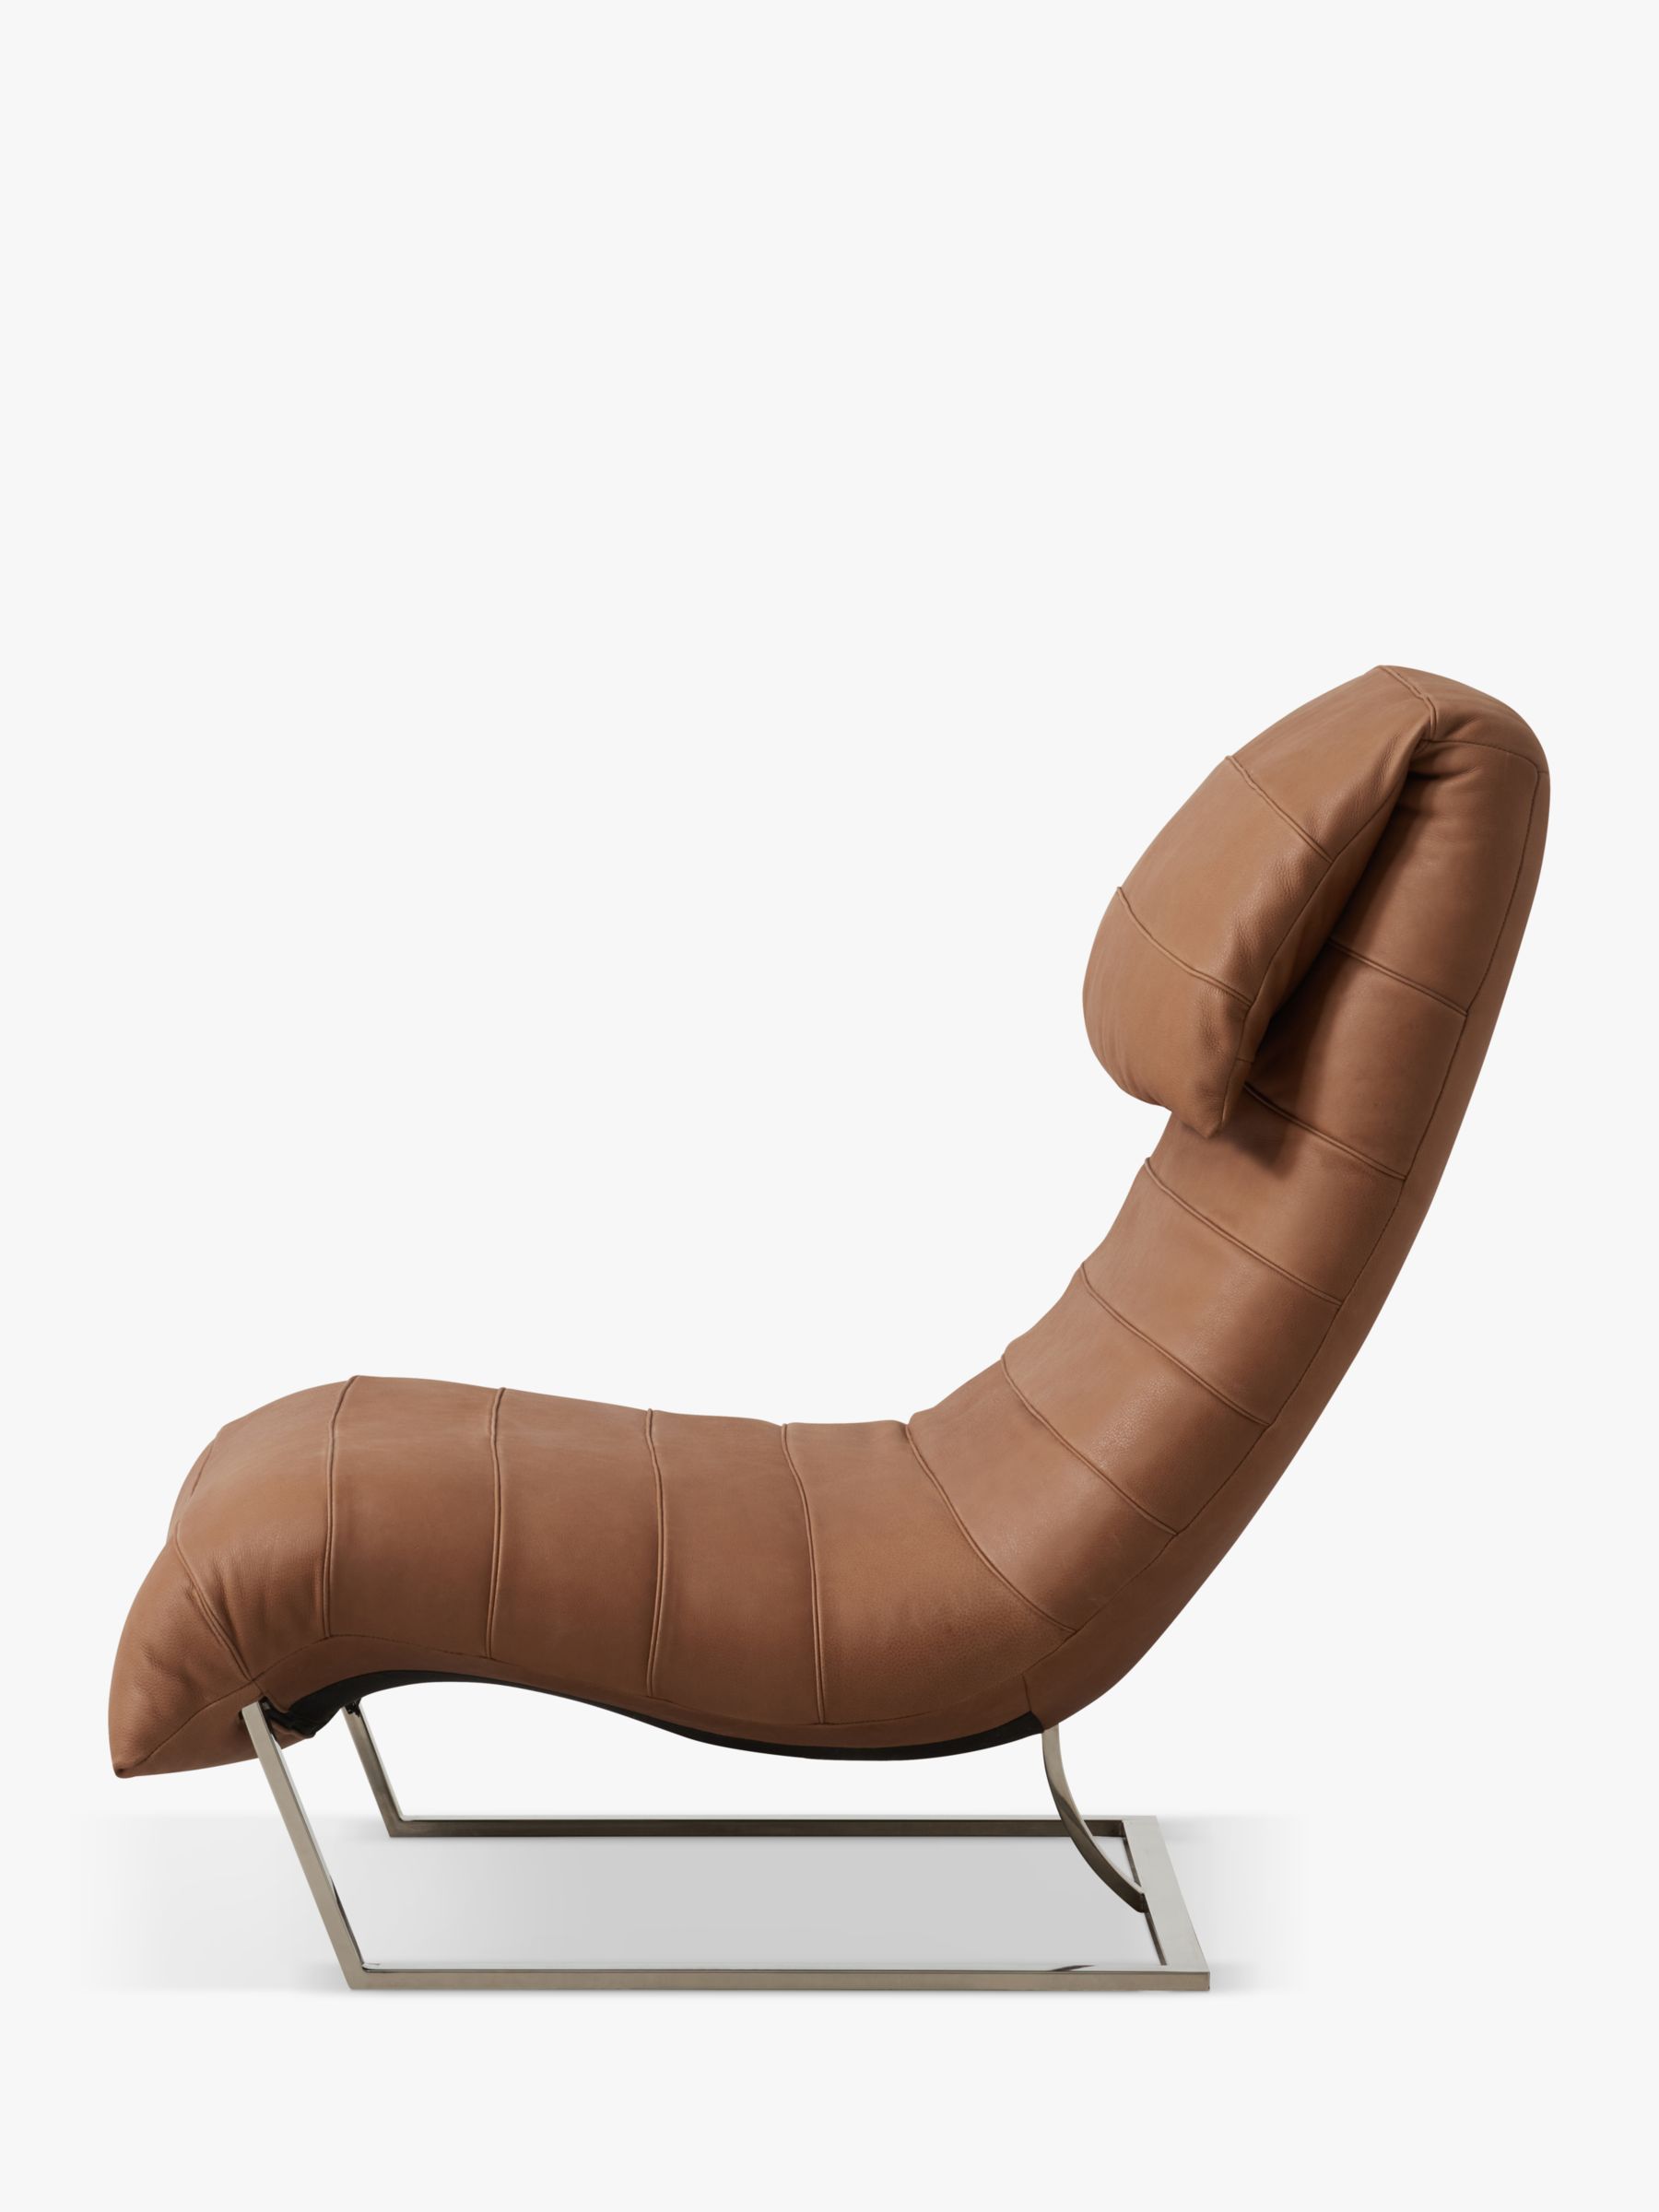 Halo Fold Leather Chair, Dark Leg, Hand Tipped Camel